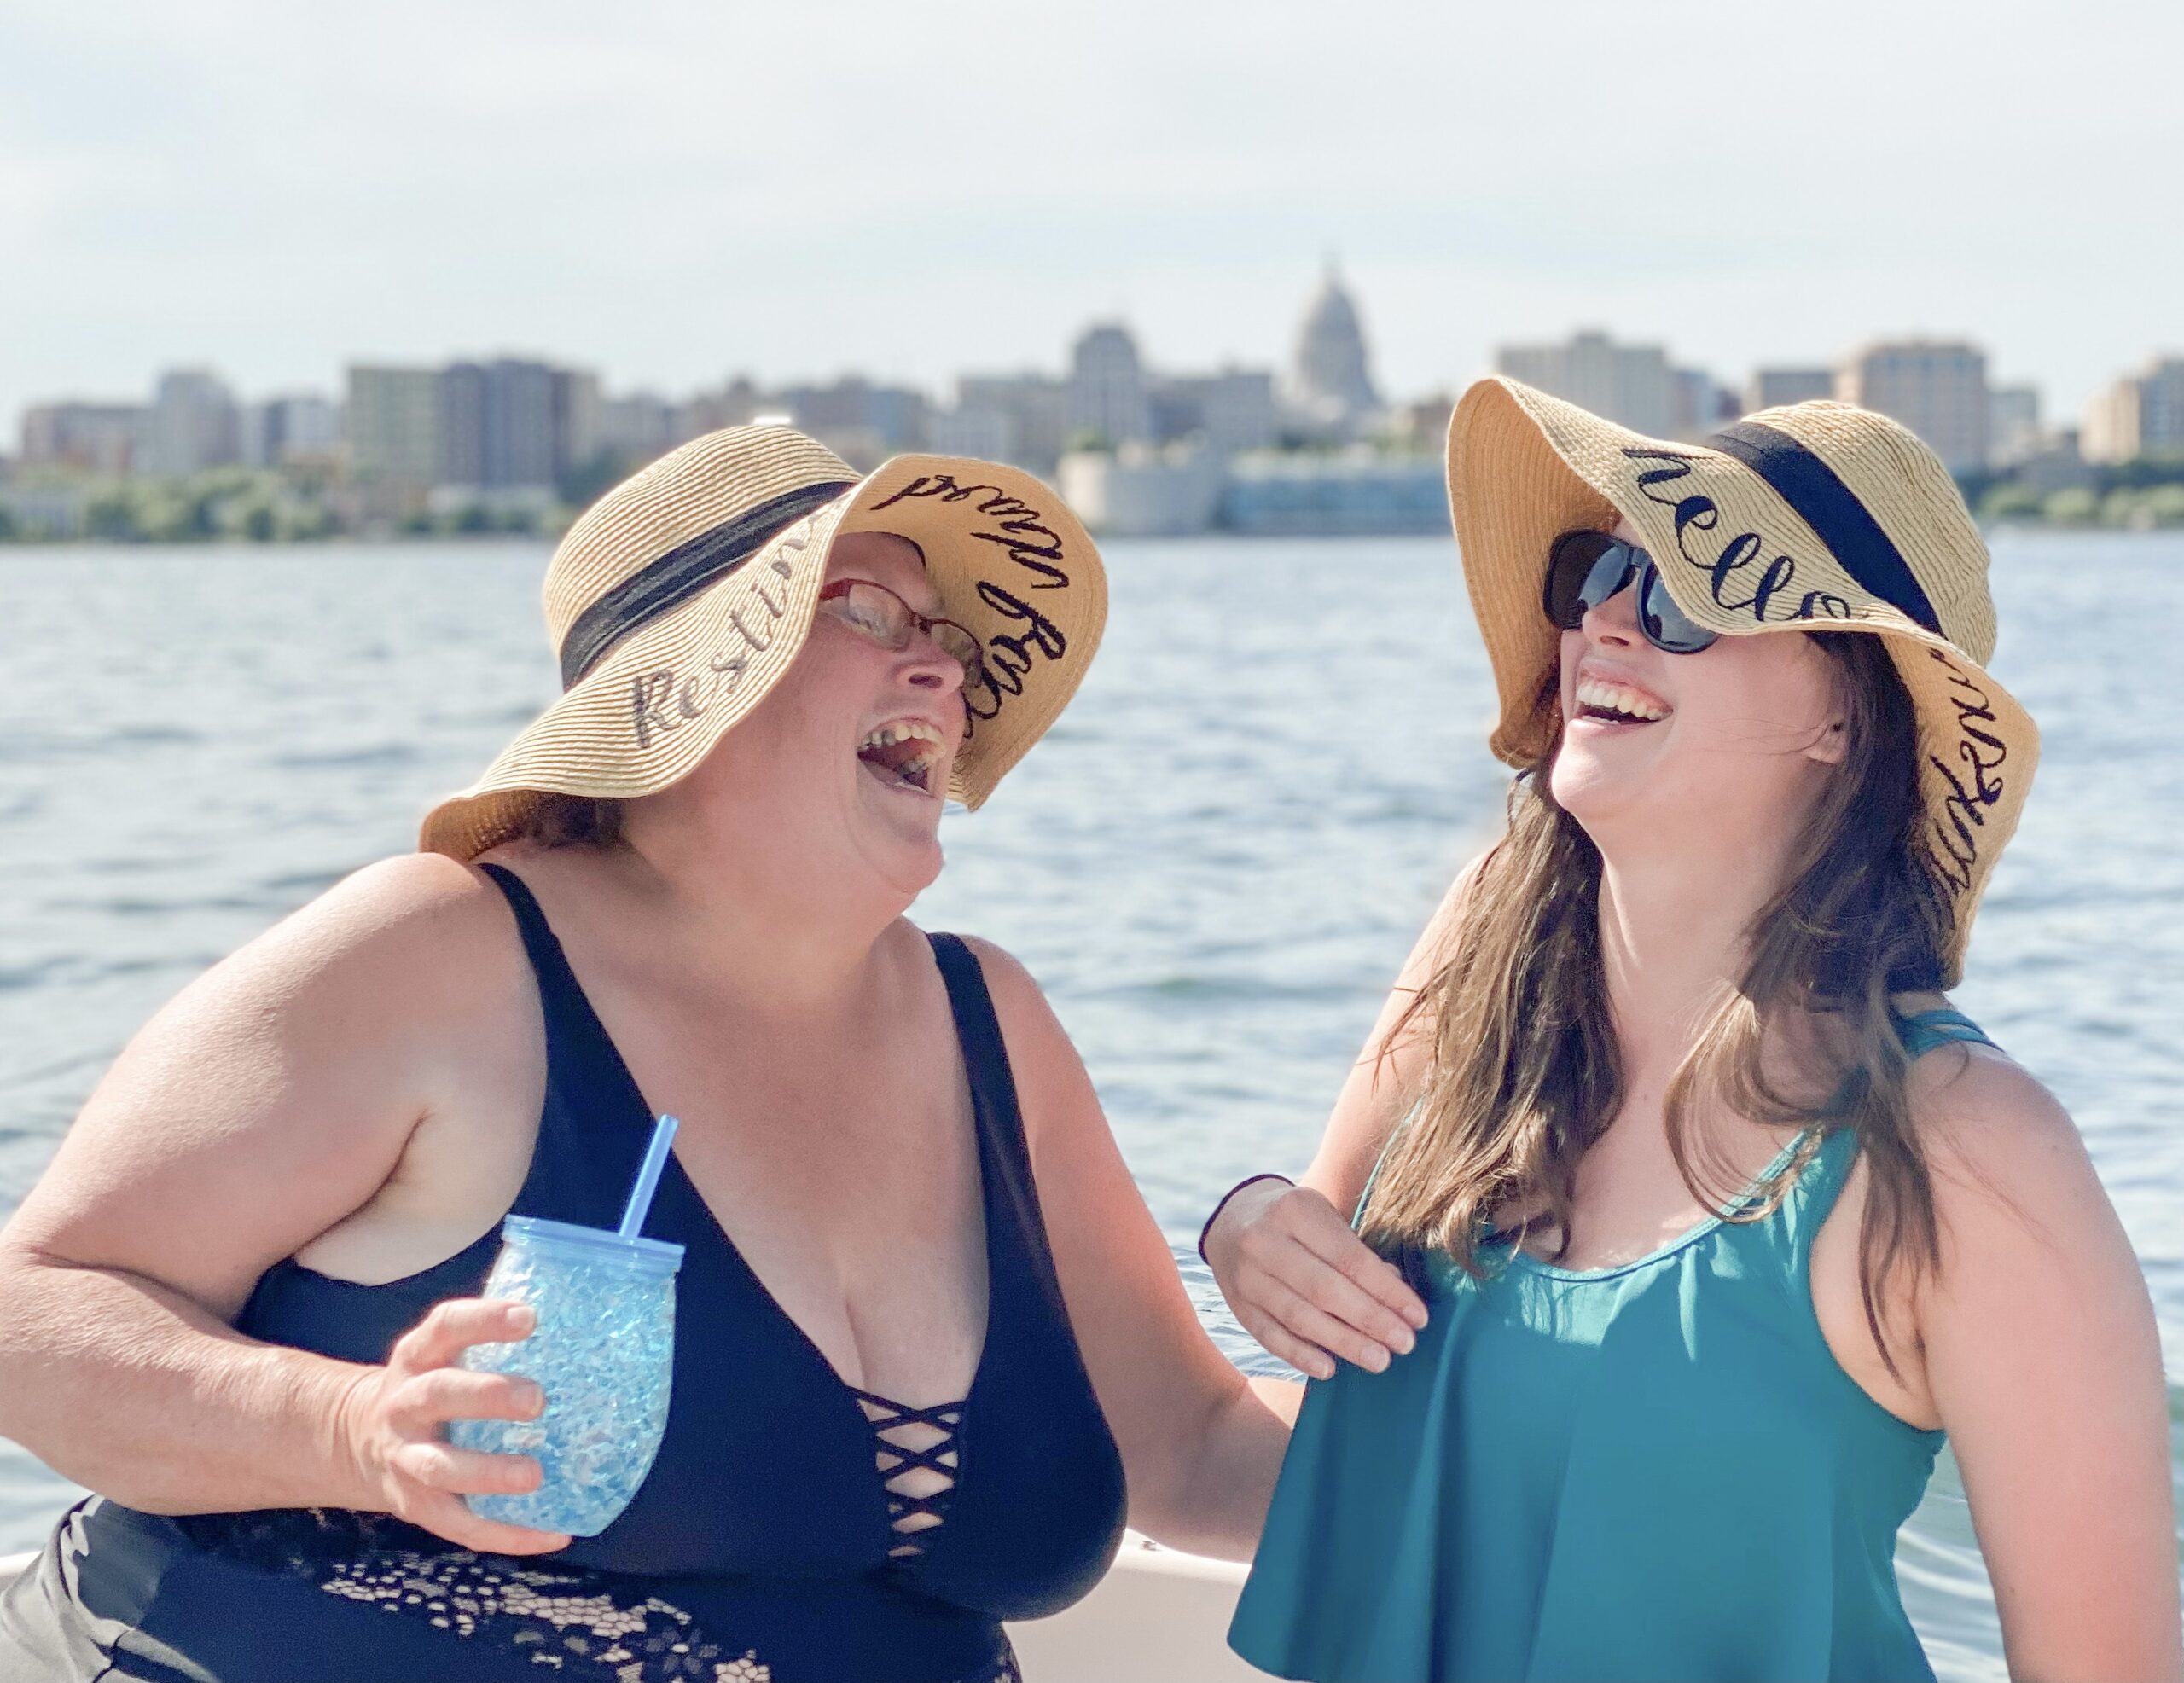 Mom and daughter laughing on a boat together.